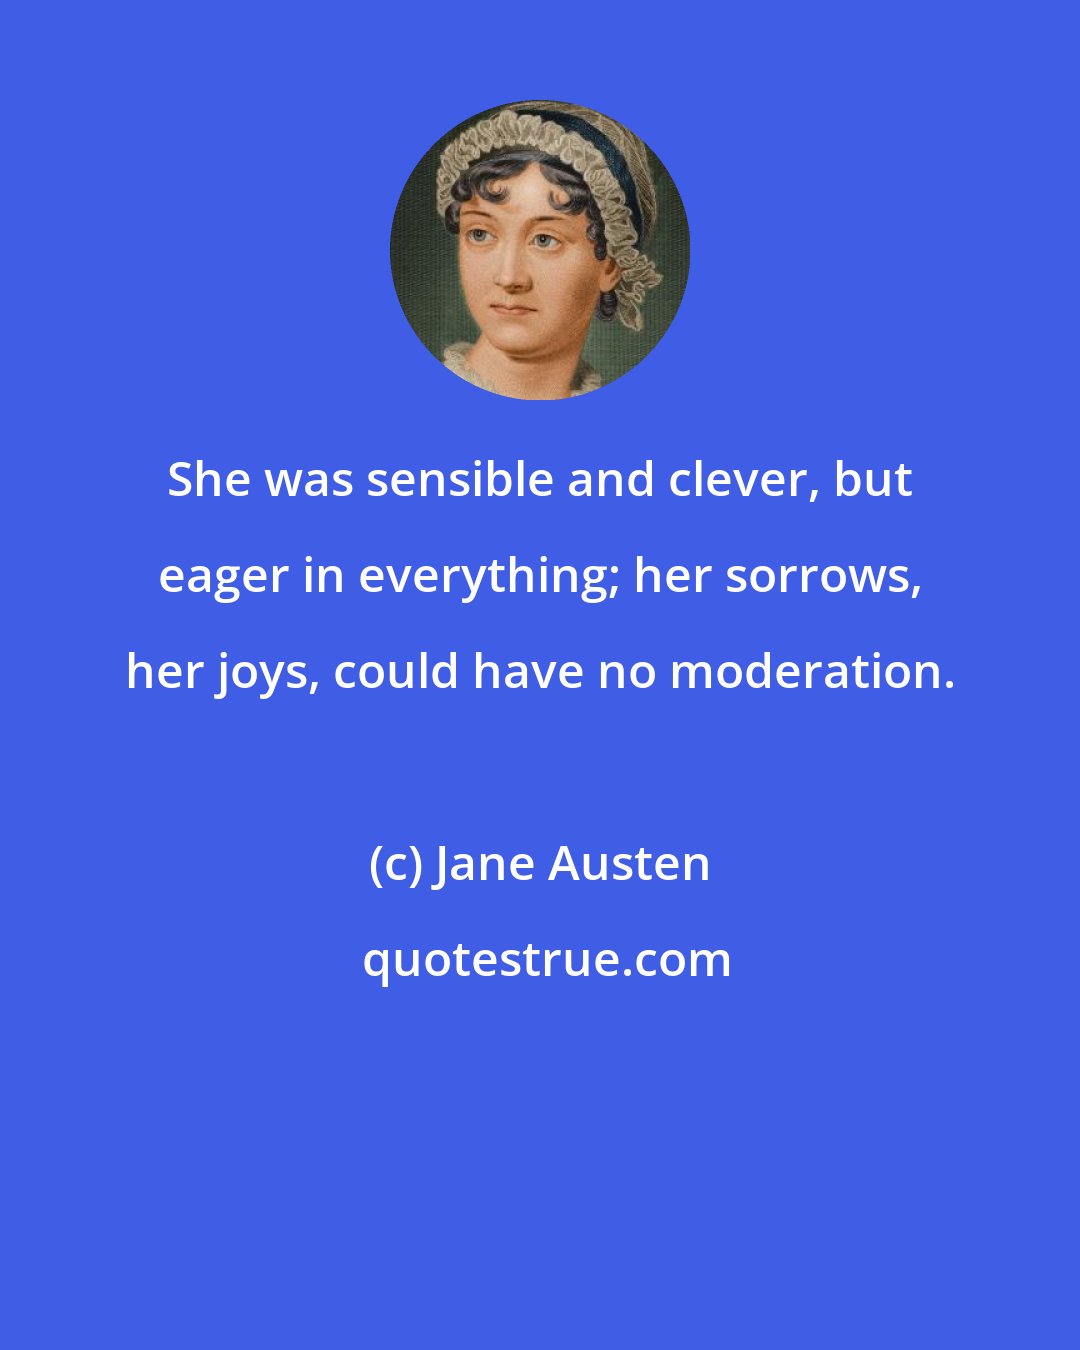 Jane Austen: She was sensible and clever, but eager in everything; her sorrows, her joys, could have no moderation.